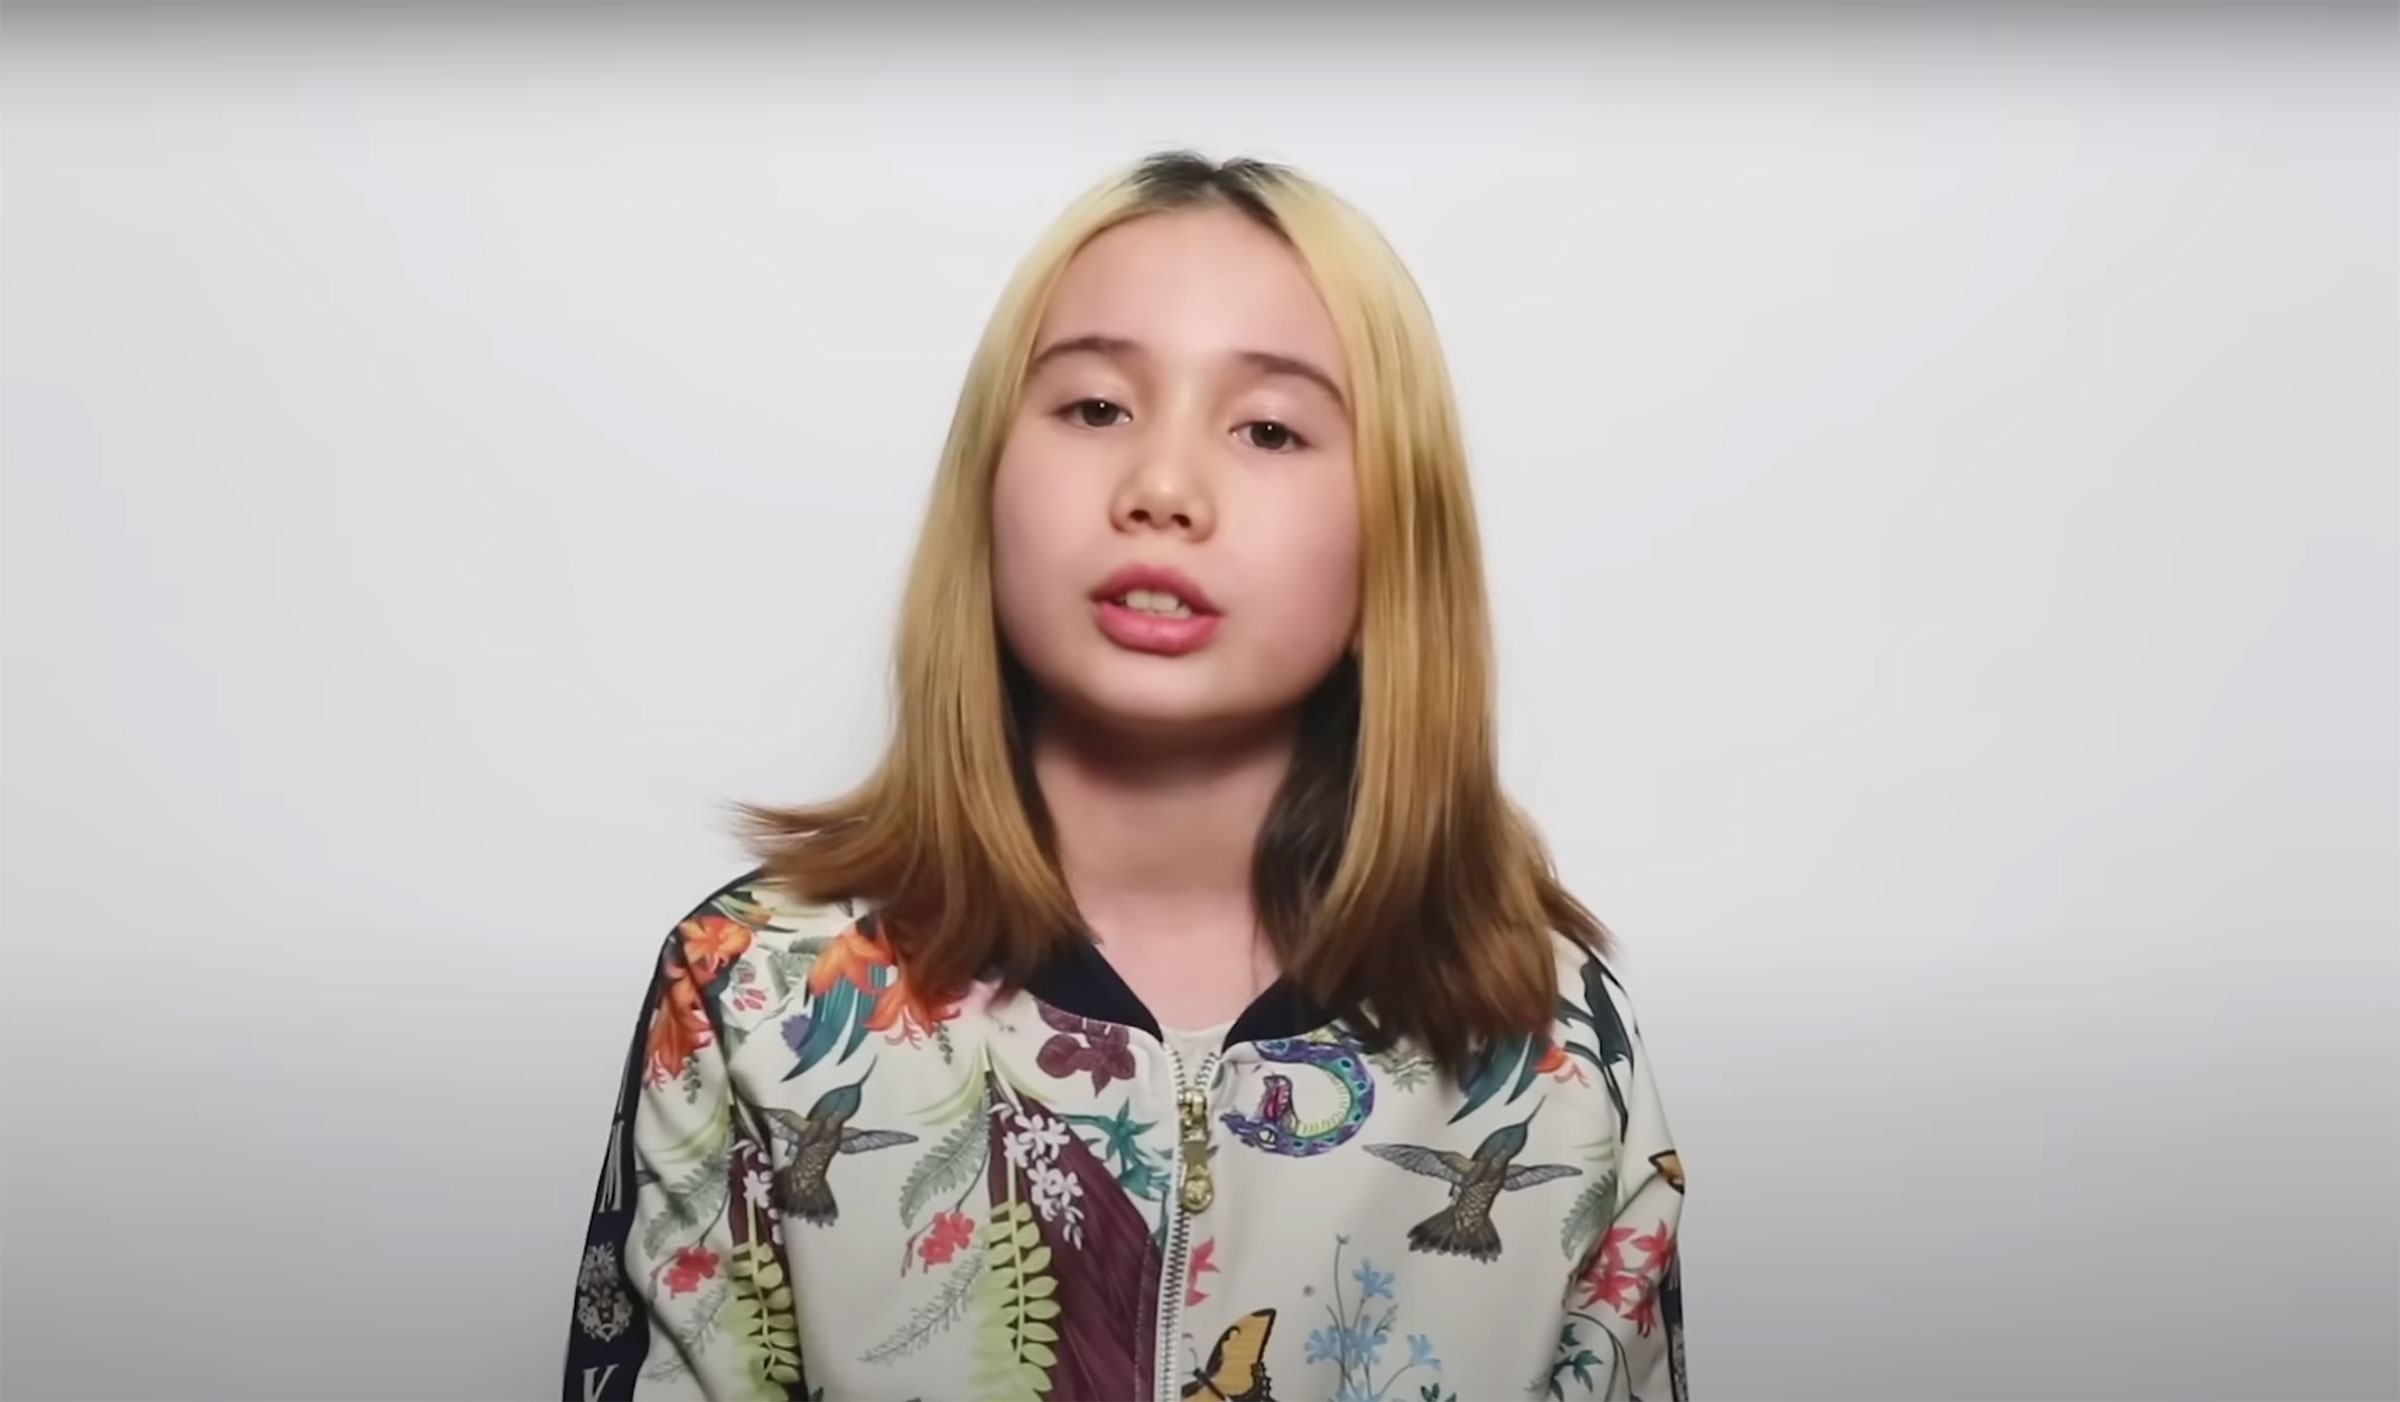 A screenshot from a video from Lil Tay's youtube channel